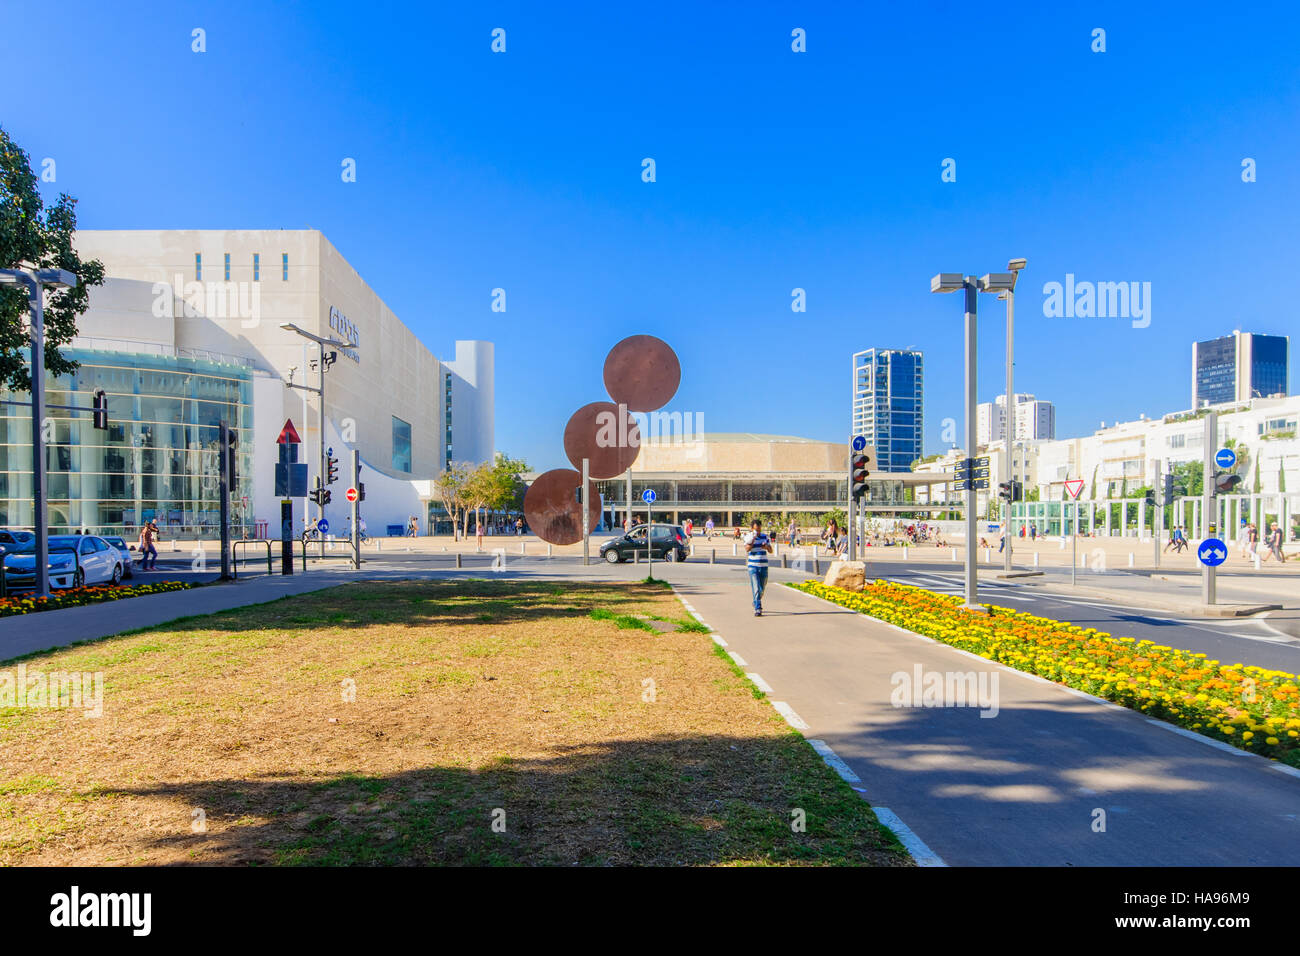 TEL AVIV, ISRAEL - MAY 15, 2015: Scene of the Rothschild Boulevard, a mobile library and the Habima Square (The Orchestra Plaza), with visitors, in Te Stock Photo